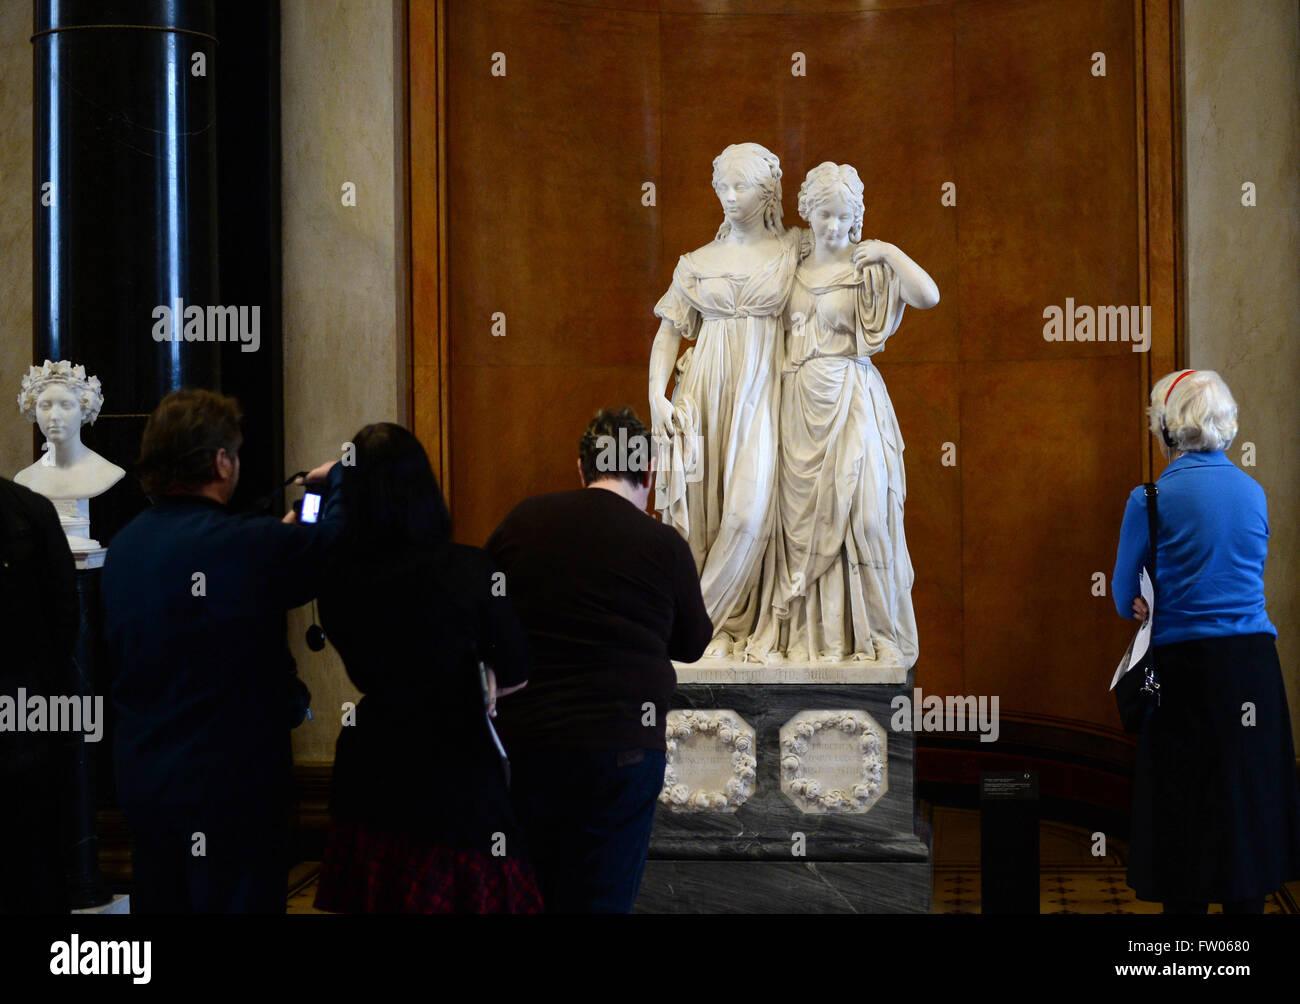 The marble statue of Princesses Louise and Frederica of Prussia by Johann Gottfried Schadow in the Alte Nationalgalerie museum on Museum Island in Berlin, Germany, 31 March 2016. Photo: JENS KALAENE/dpa Stock Photo